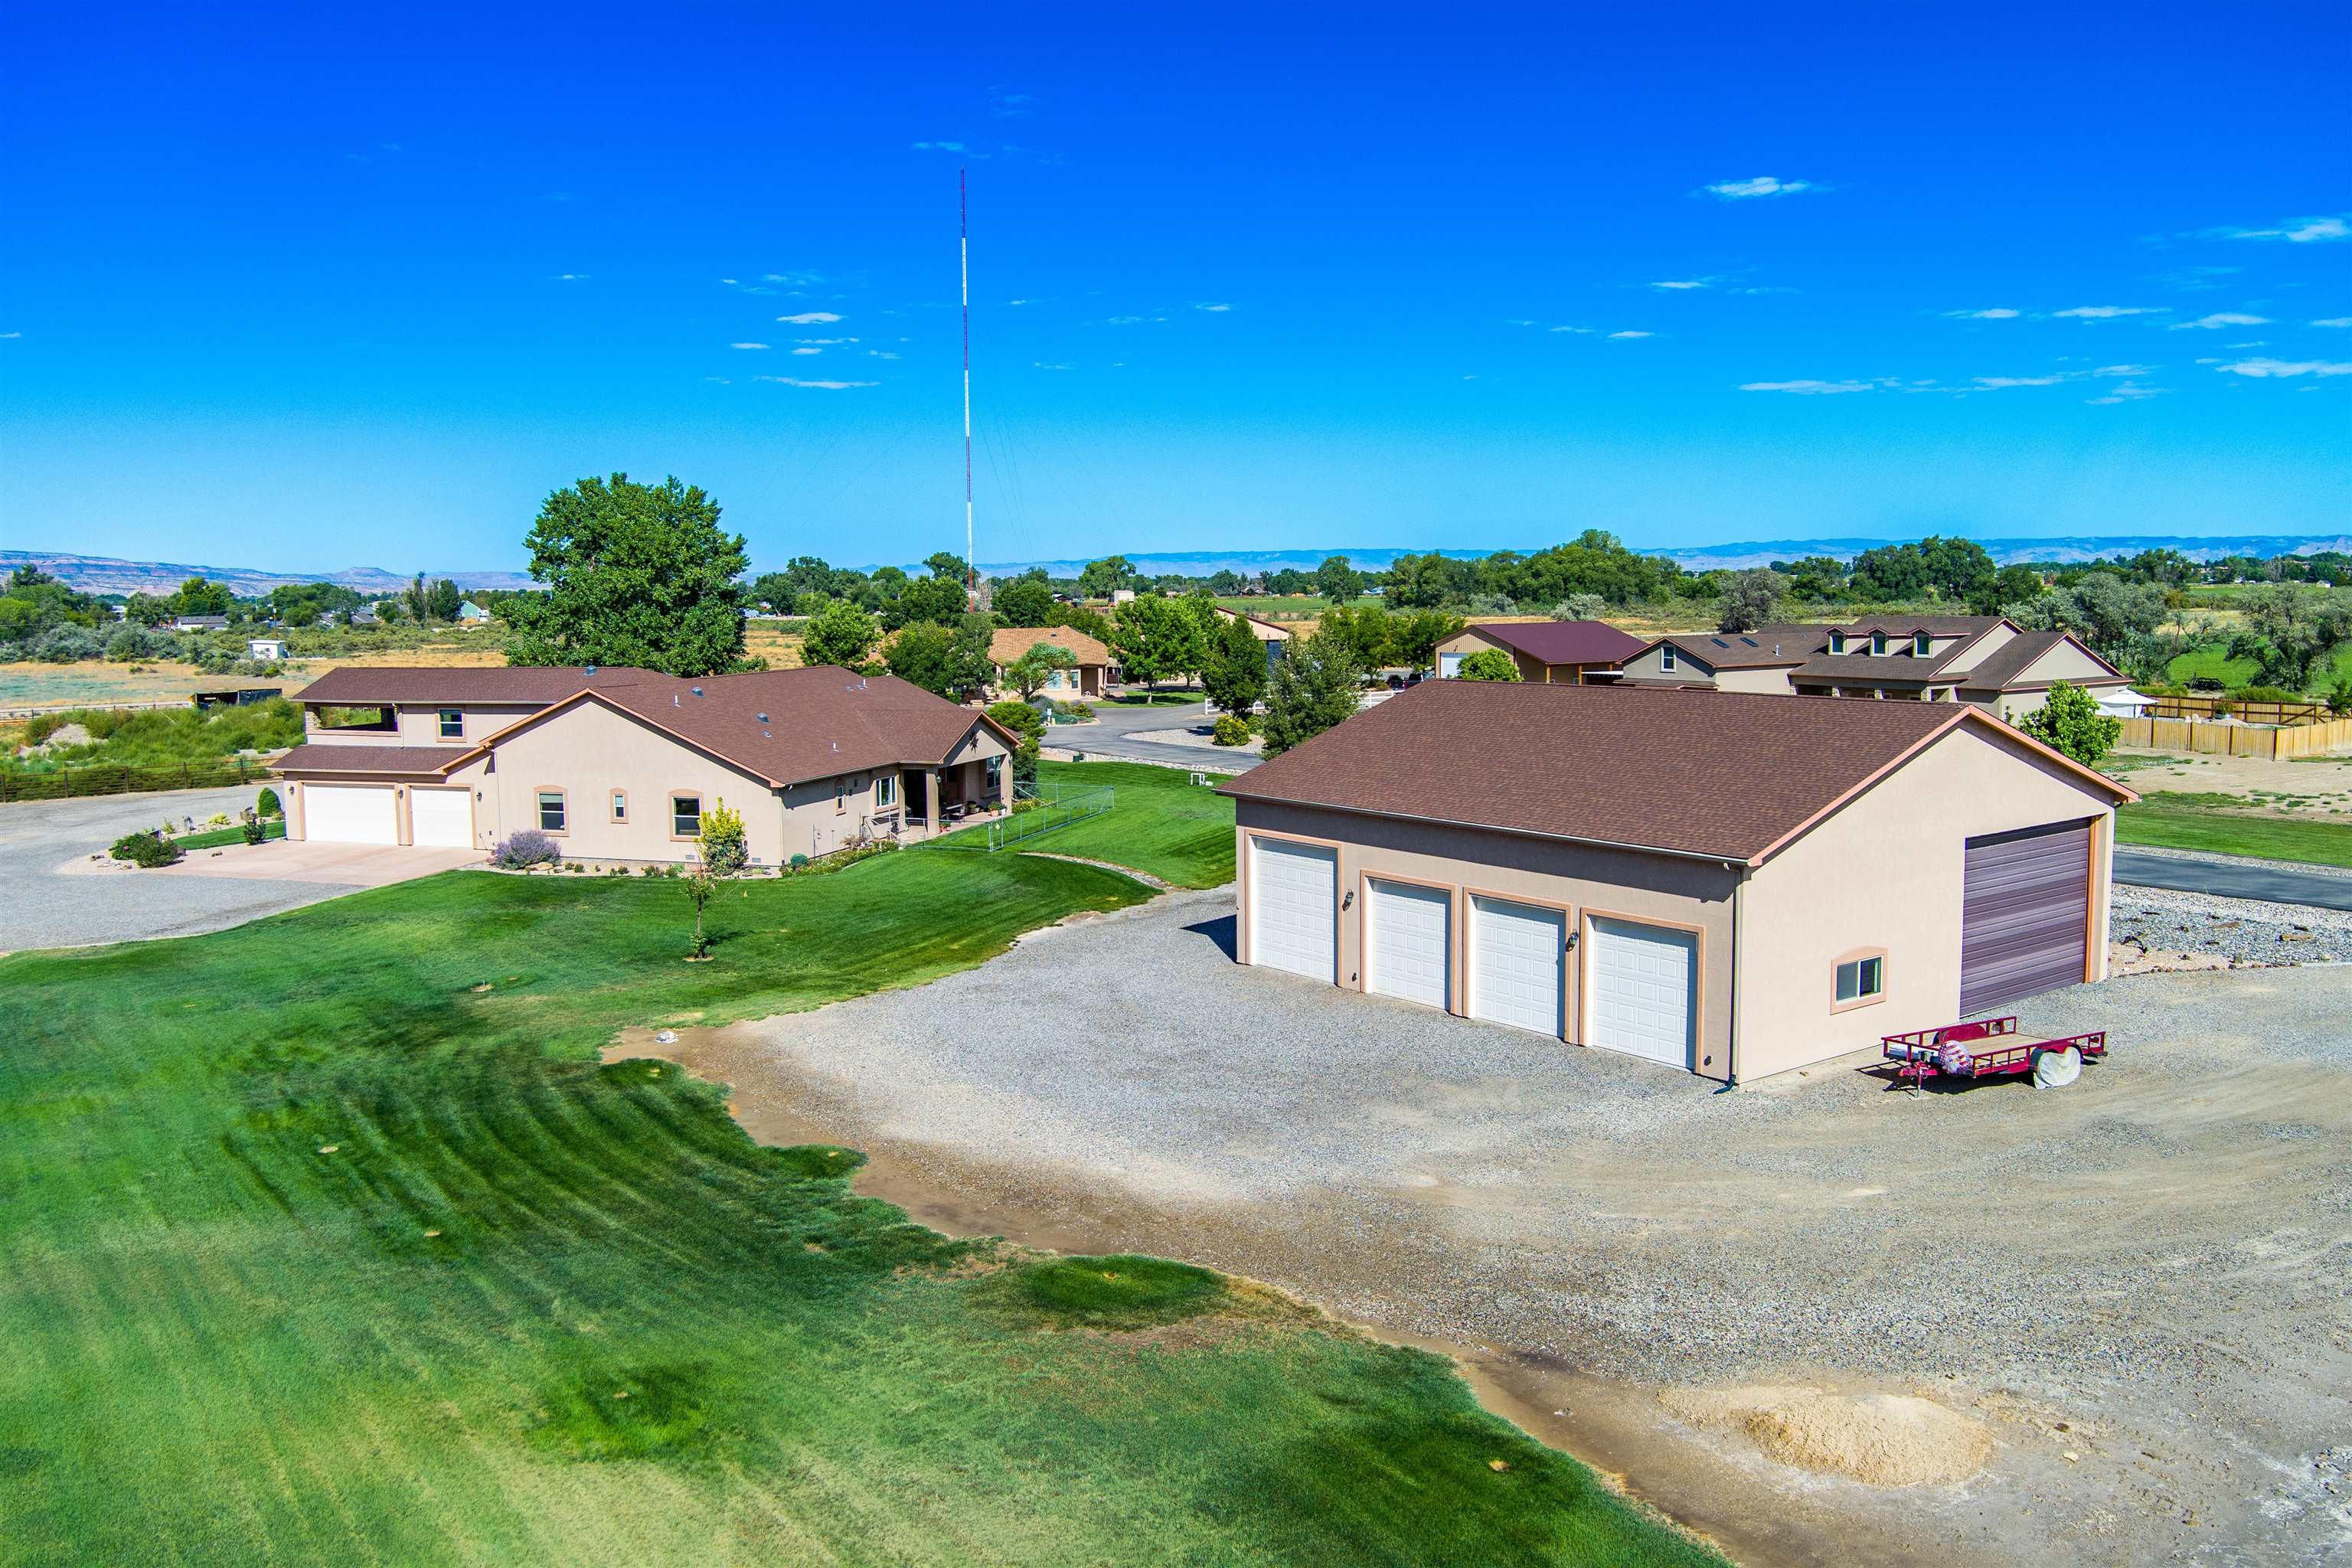 Over the top, pride of ownership. This home has it all. Just move in and enjoy this sprawling rancher with 2 master bedrooms on the main level 5 piece master bathroom. 3 bedrooms, 4 bathrooms, office, bonus room/game room and a 3 + car garage (detached has an RV bay plus an additional 4 bay garage (48 X 56).  Tucked back in a private cul-de-sac. 2 acres professionally/fully landscaped. Breathtaking views off your West facing back patio to enjoy your cool mornings and shady afternoons. Beautiful wood flooring and granite and high ceilings throughout. Gas fireplace in living room. Central vac system. In floor radiant heat. wired for surround sound. Detached RV/garage shop with (2) 220 amp also has a gas heater in one bay. Plenty of room for all your toys and then some. Three covered patios!!  Views from this property are like none other!!